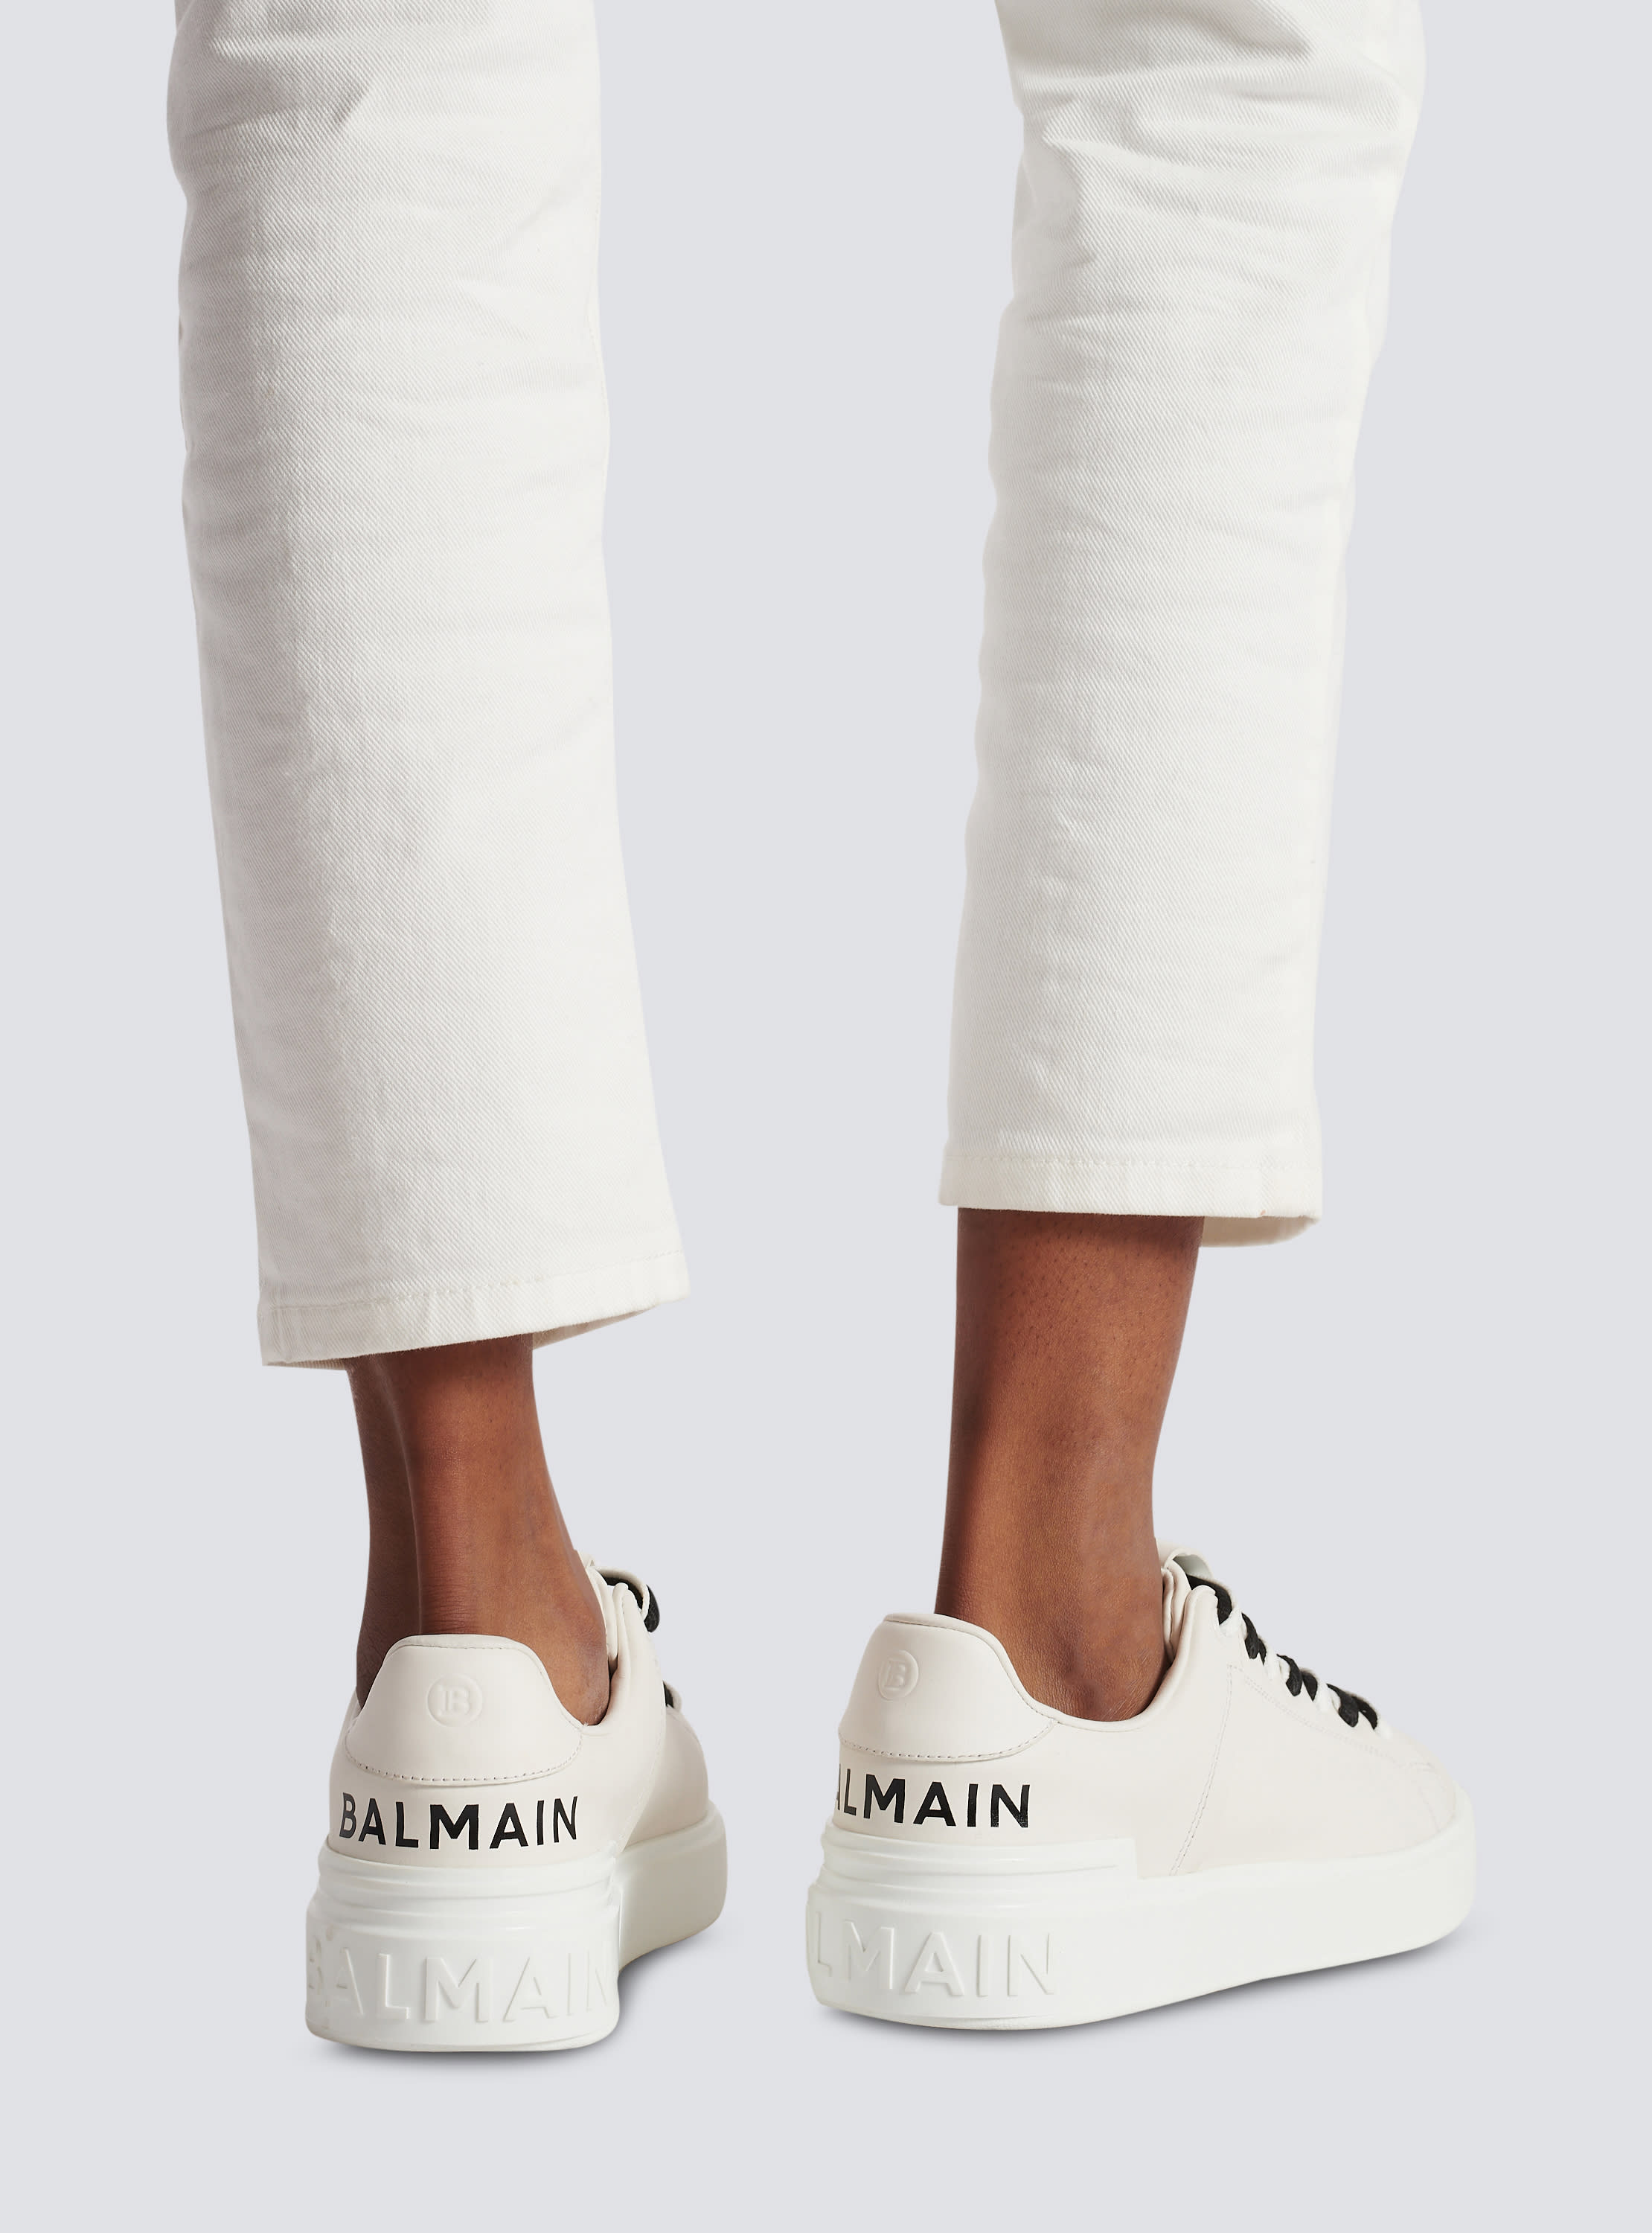 Court Style for Her: Balmain B Court Women's Sneakers